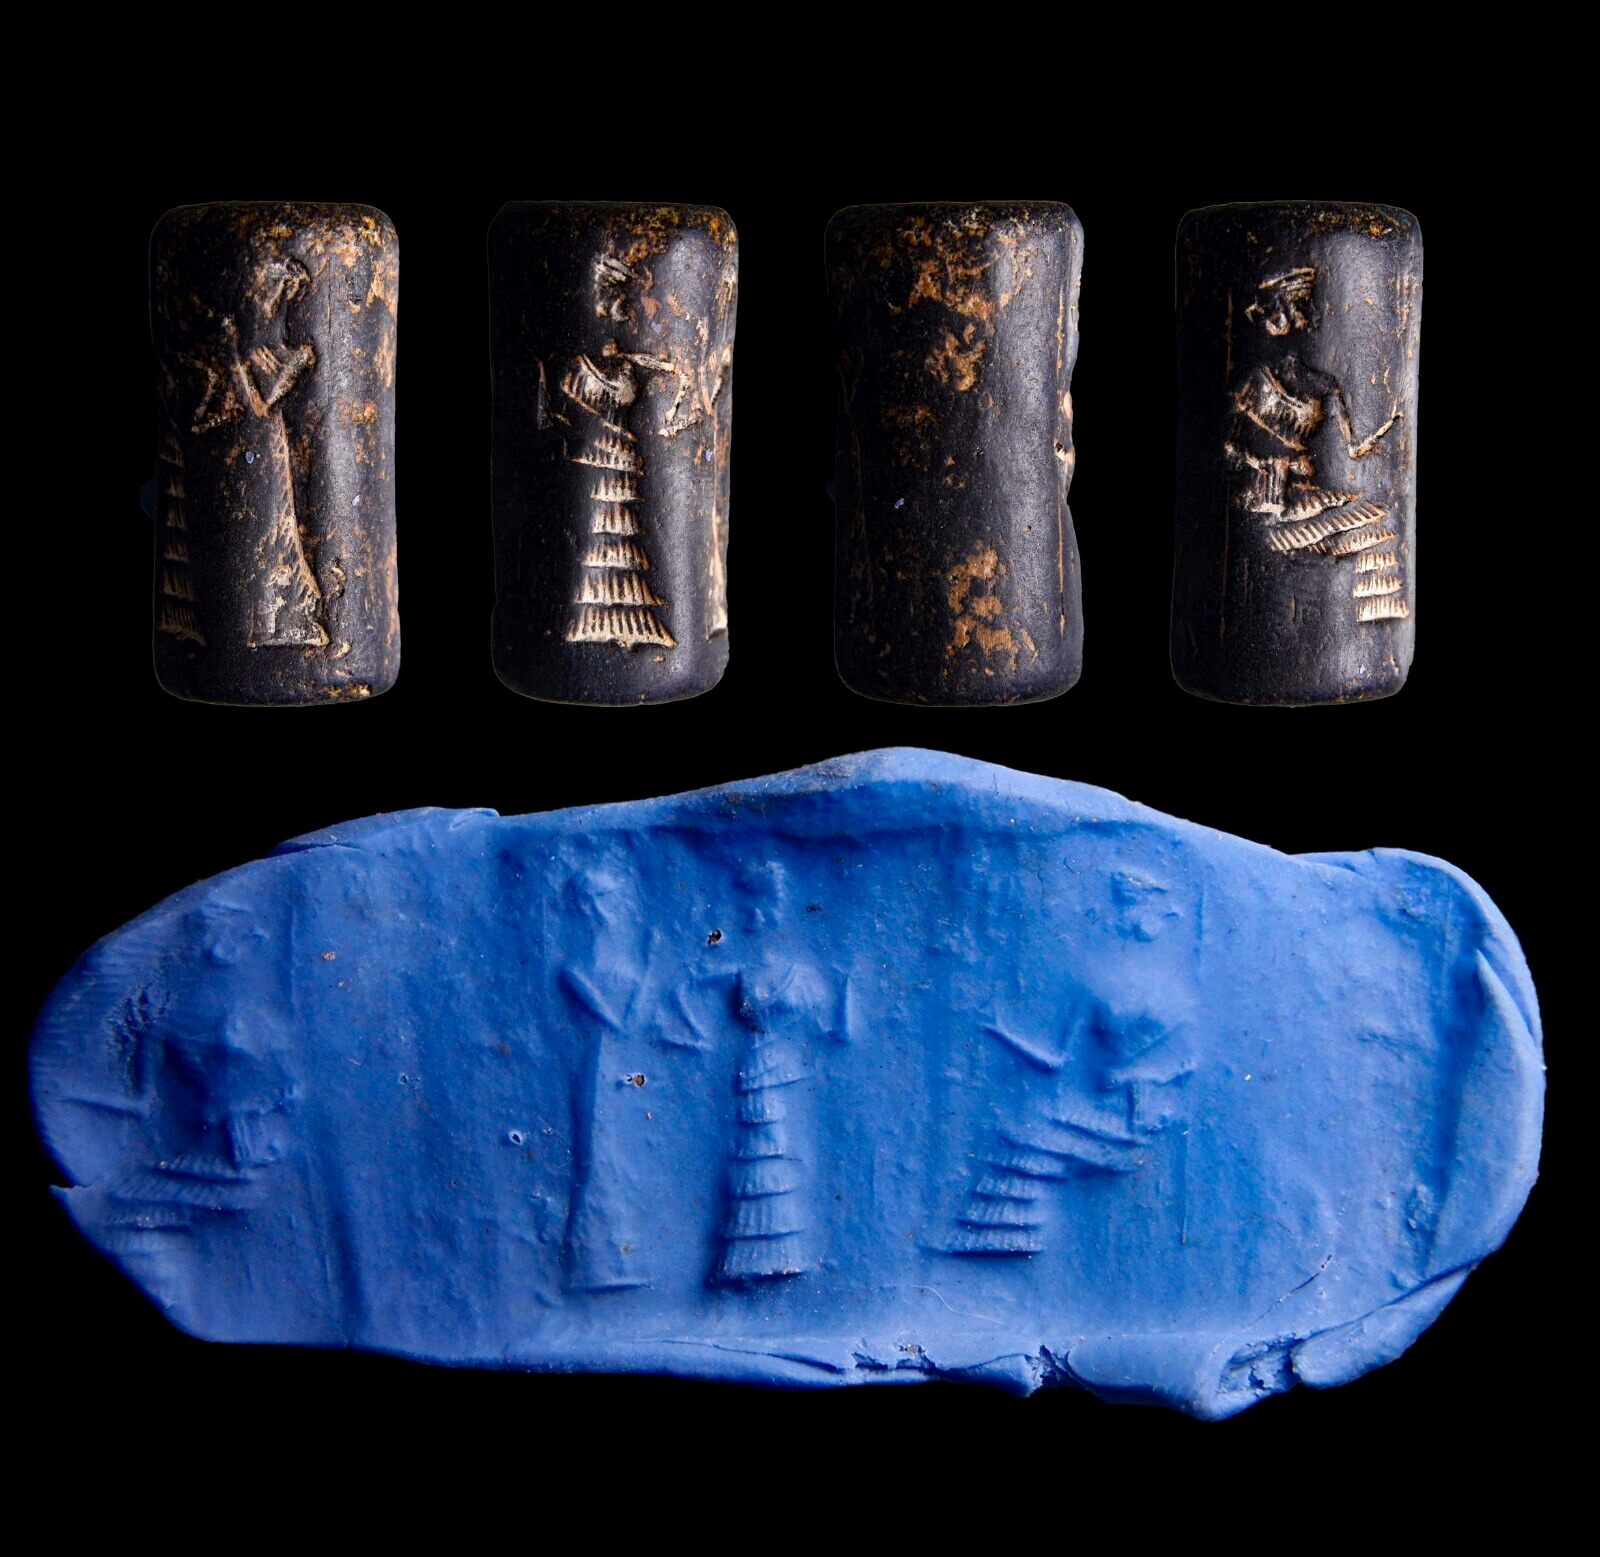 CERTIFIED AUTHENTIC Mesopotamian Stone Cylinder Seal 2nd-1st millennium BC wCOA